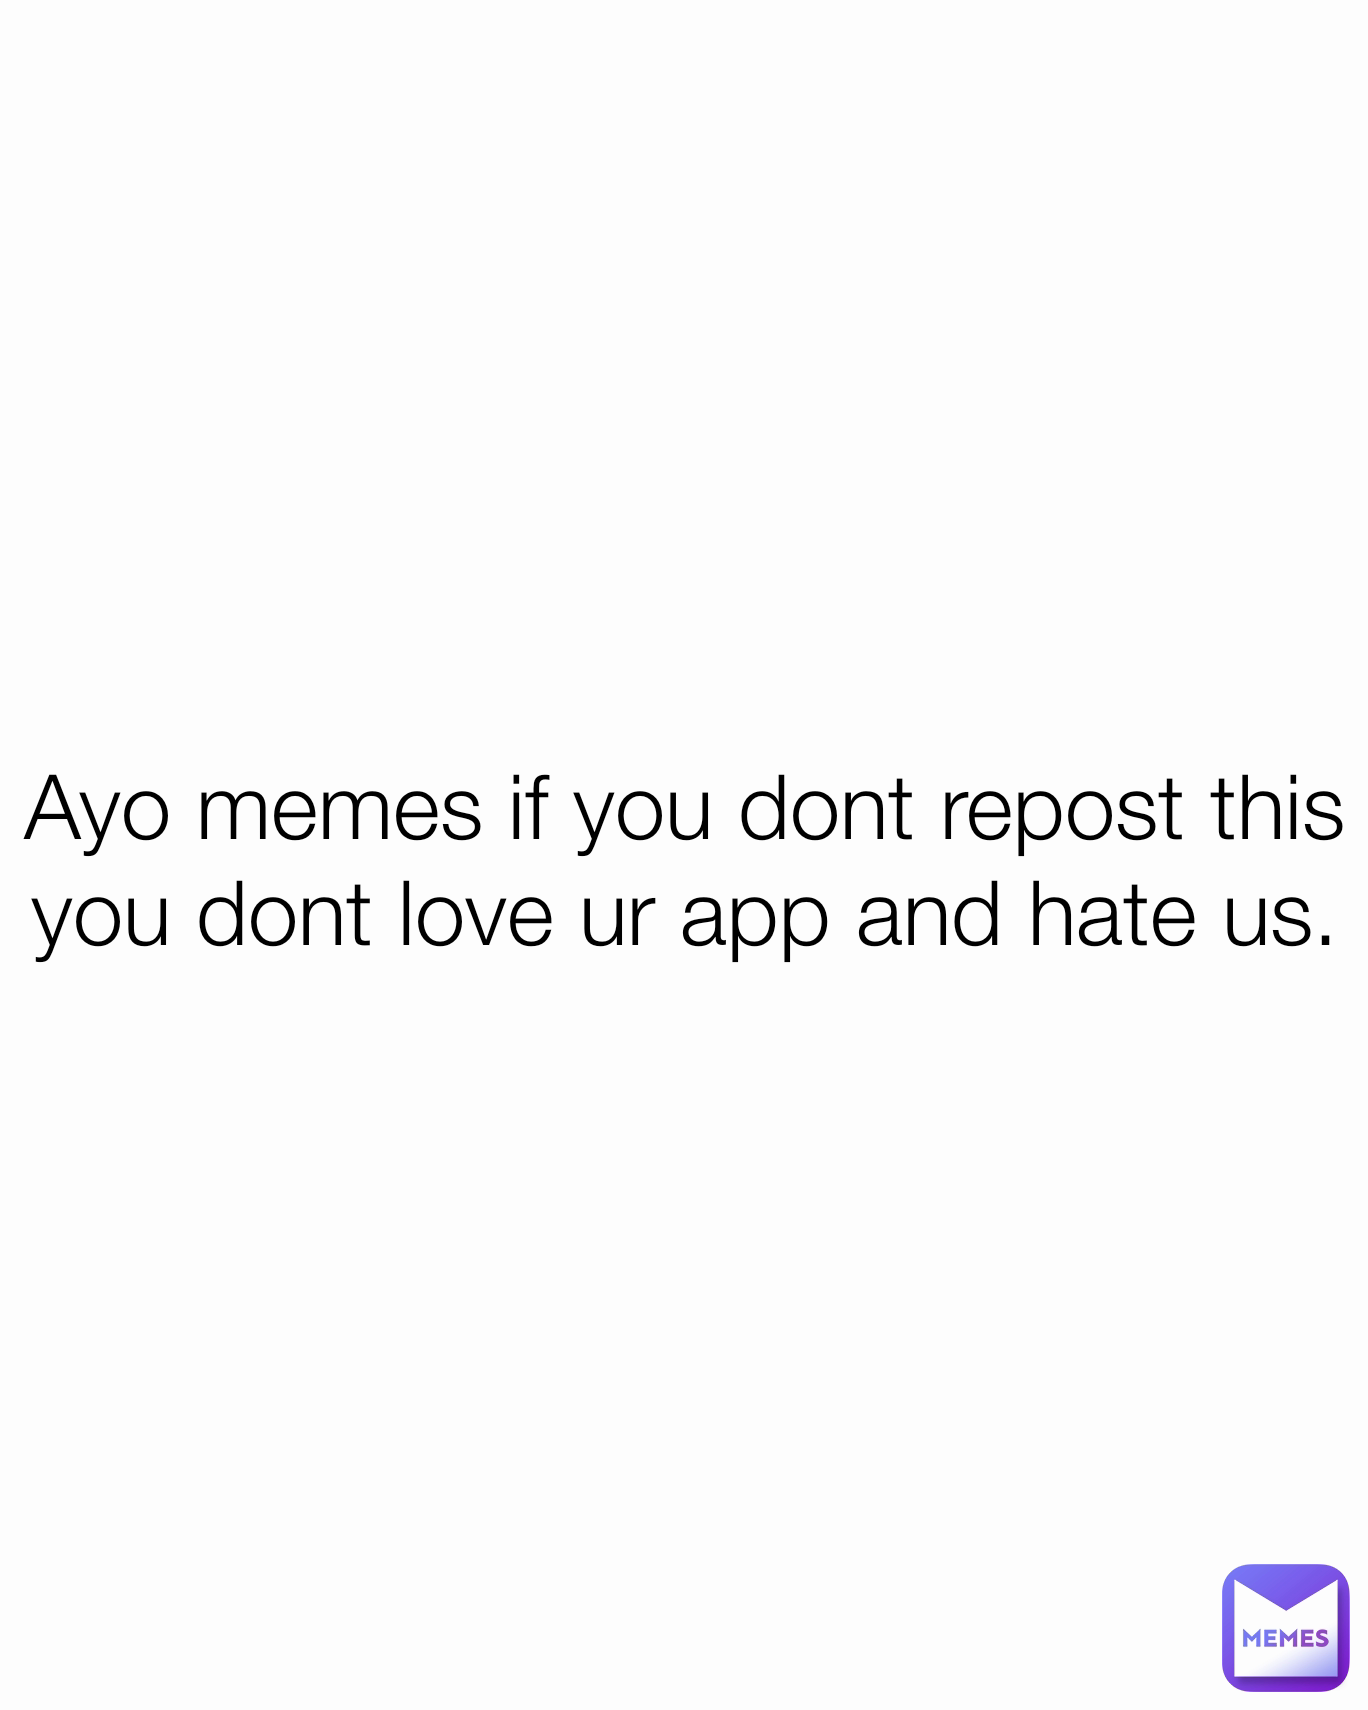 Ayo memes if you dont repost this you dont love ur app and hate us.